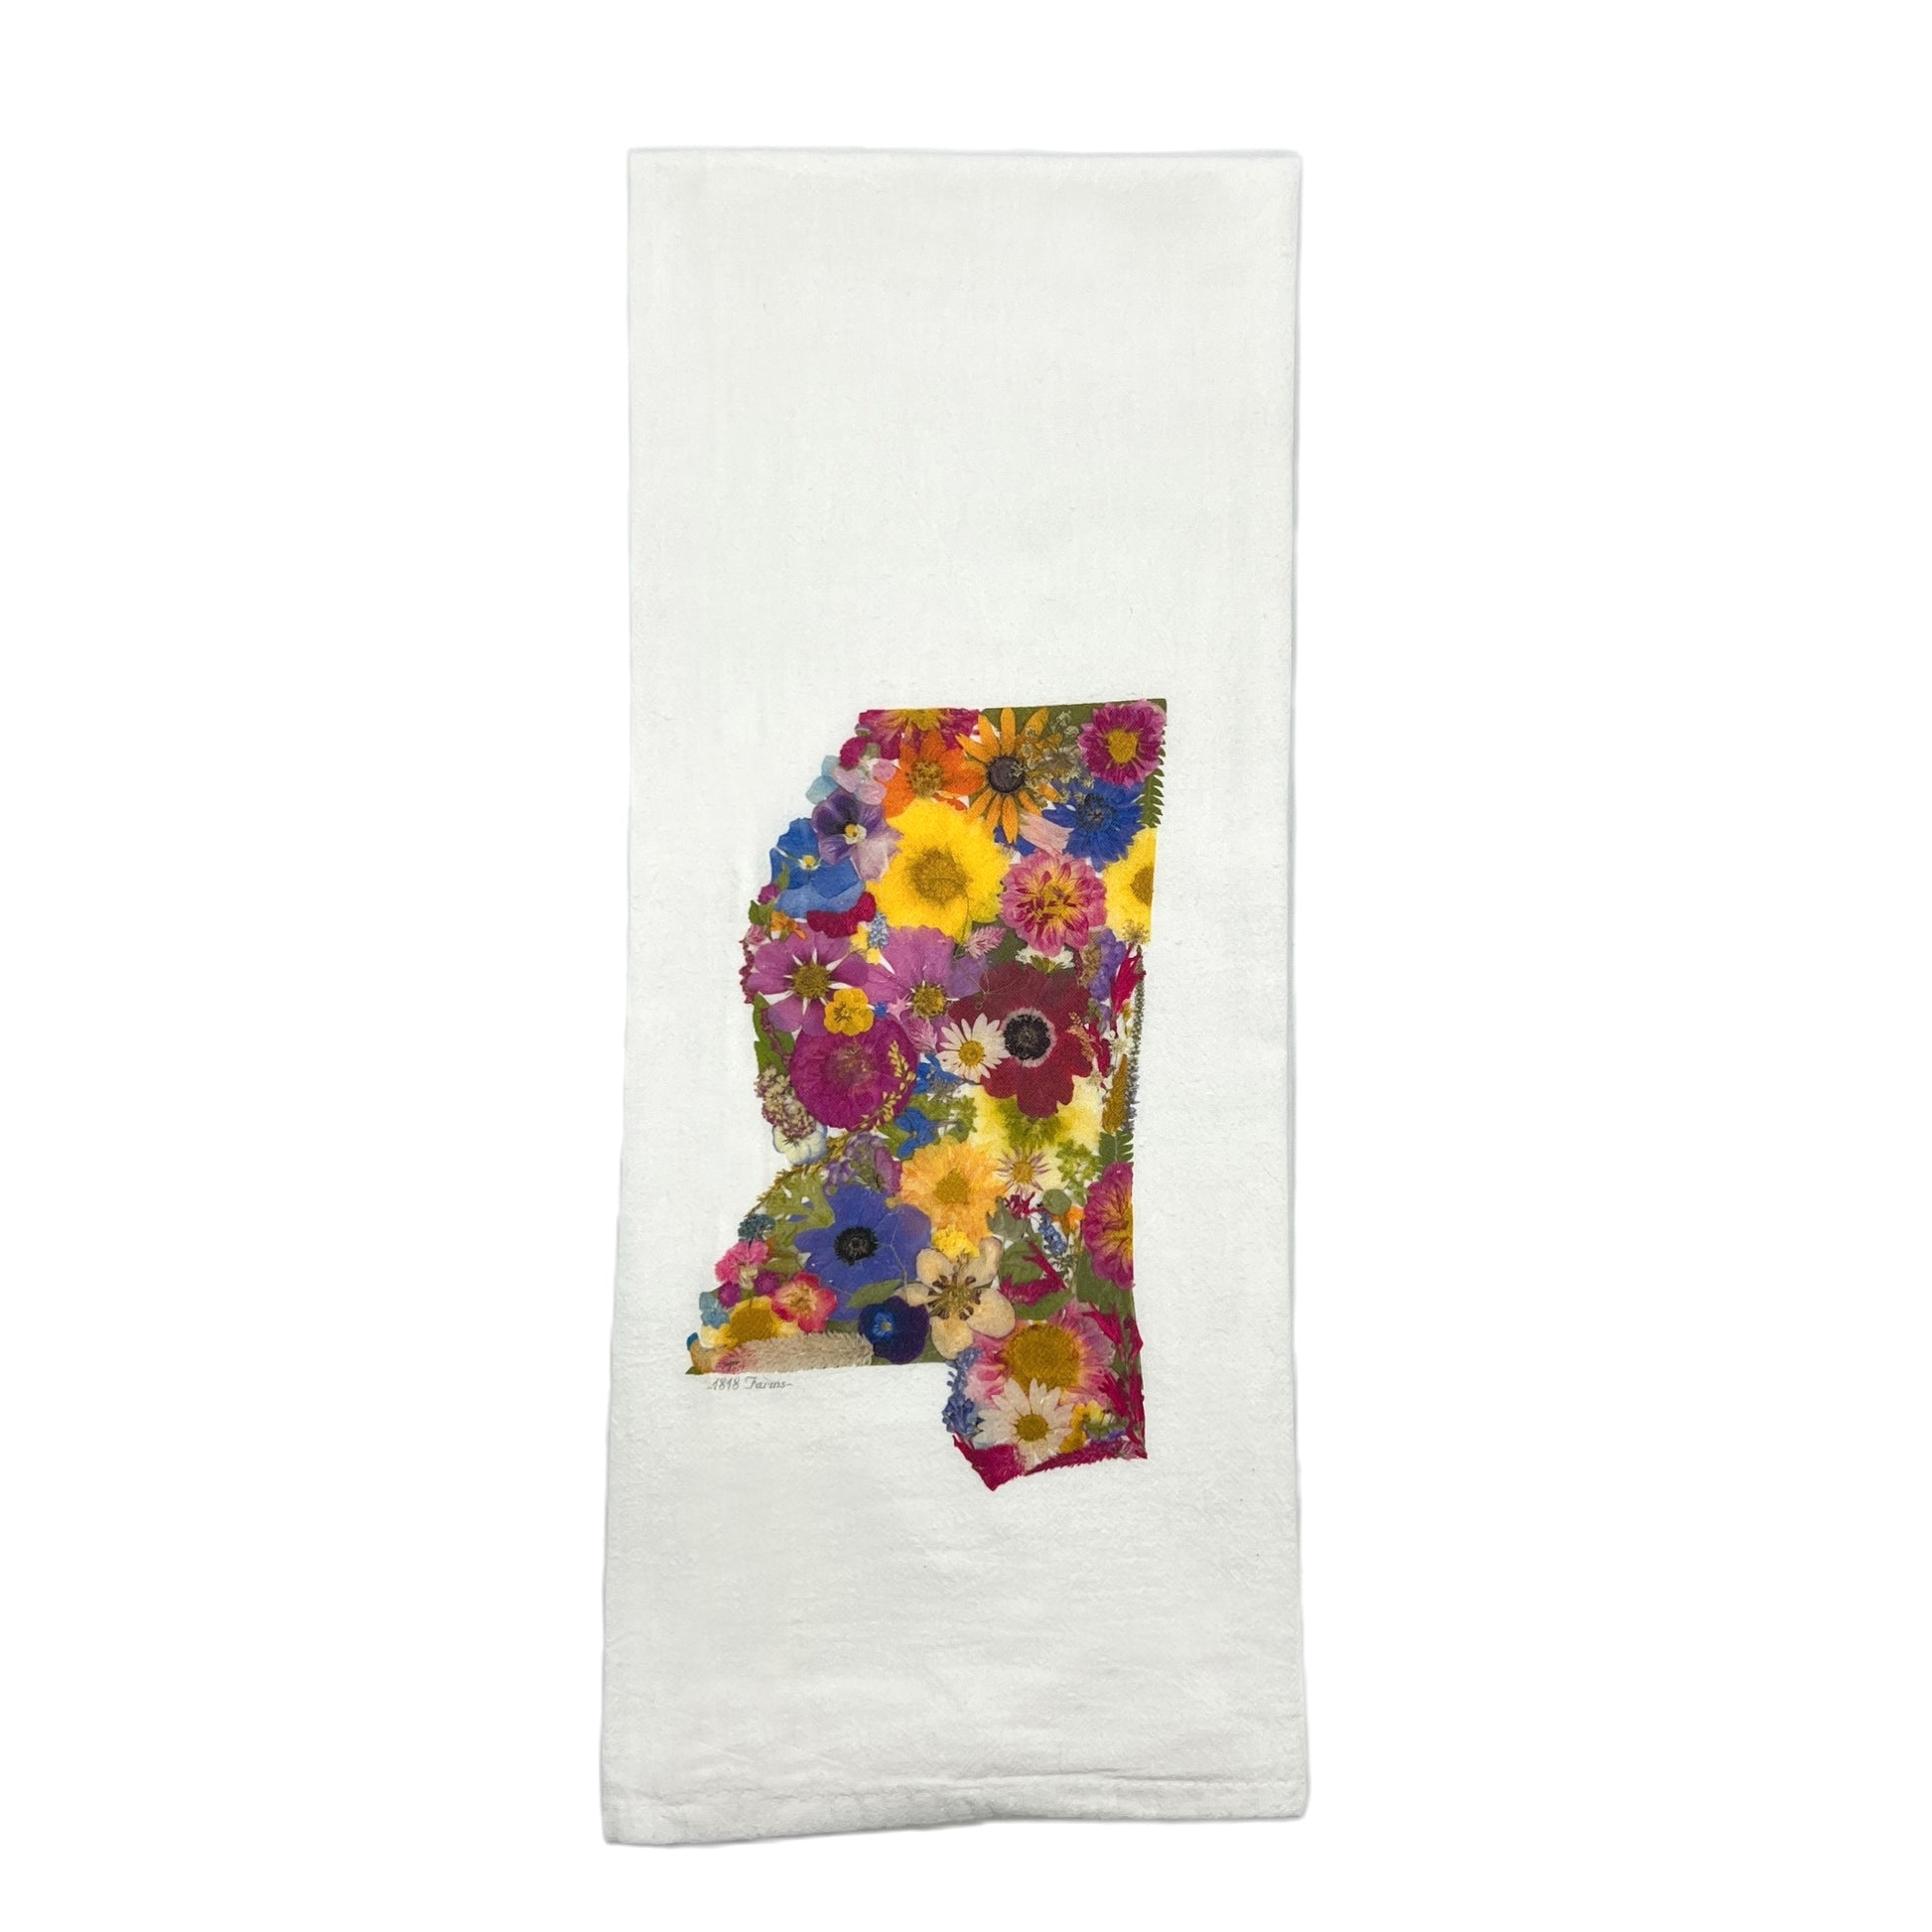 Mississippi Themed Flour Sack Towel Featuring Dried, Pressed Flowers - "Where I Bloom" Collection Towel 1818 Farms   